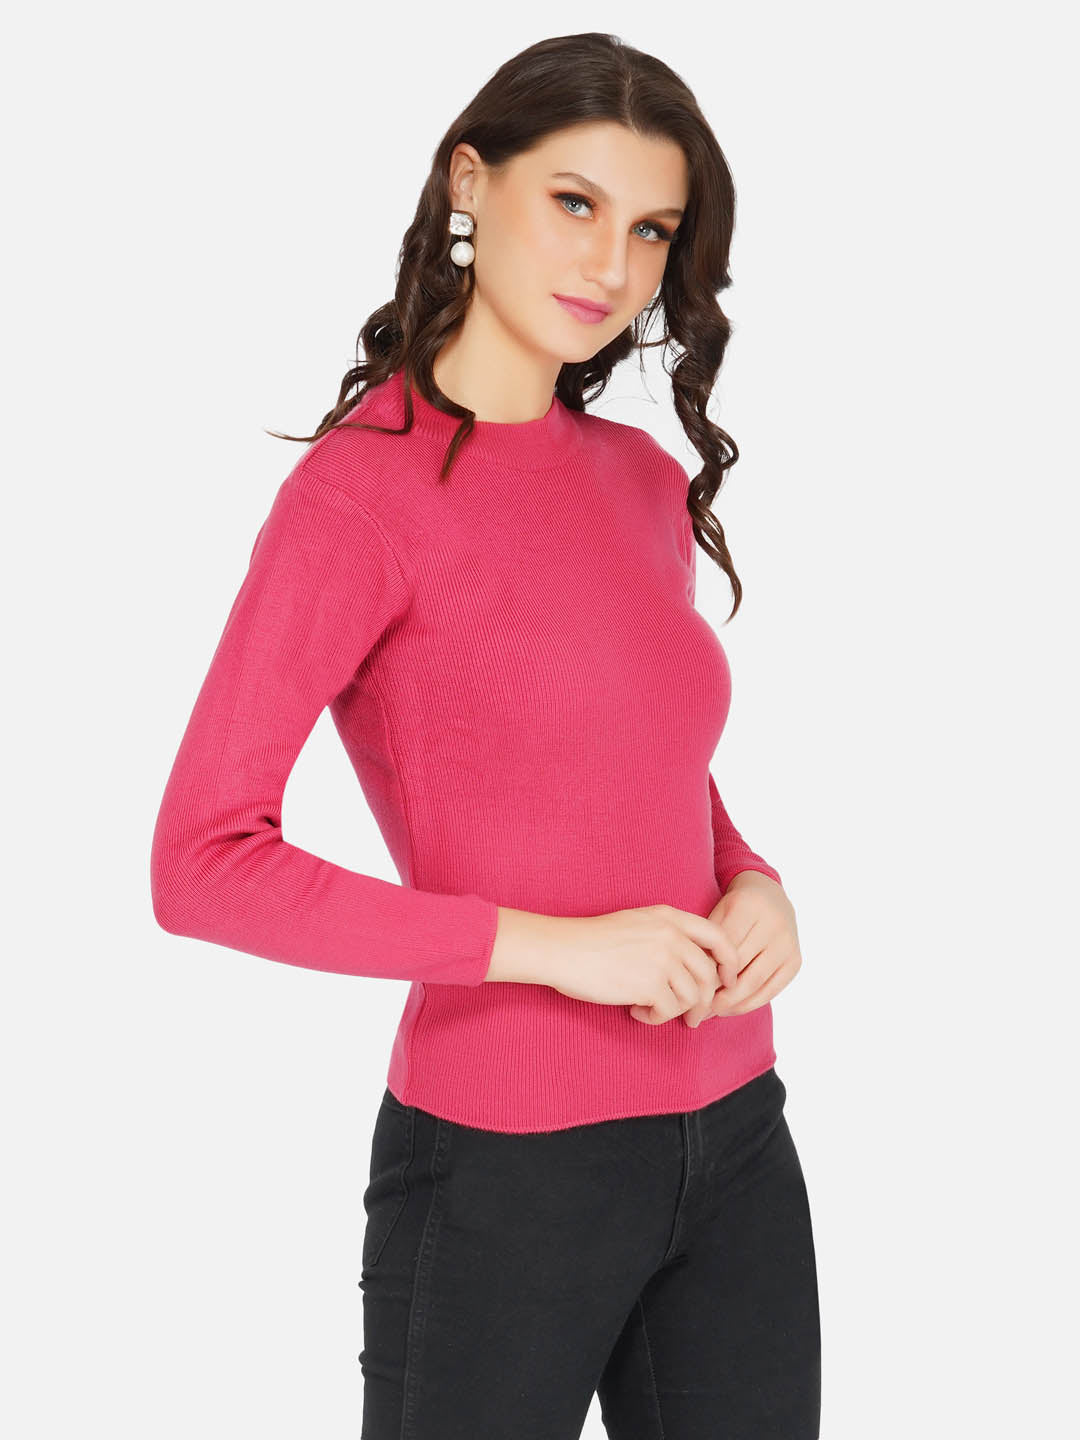 Hot Pink Round Neck Knitted Sweater